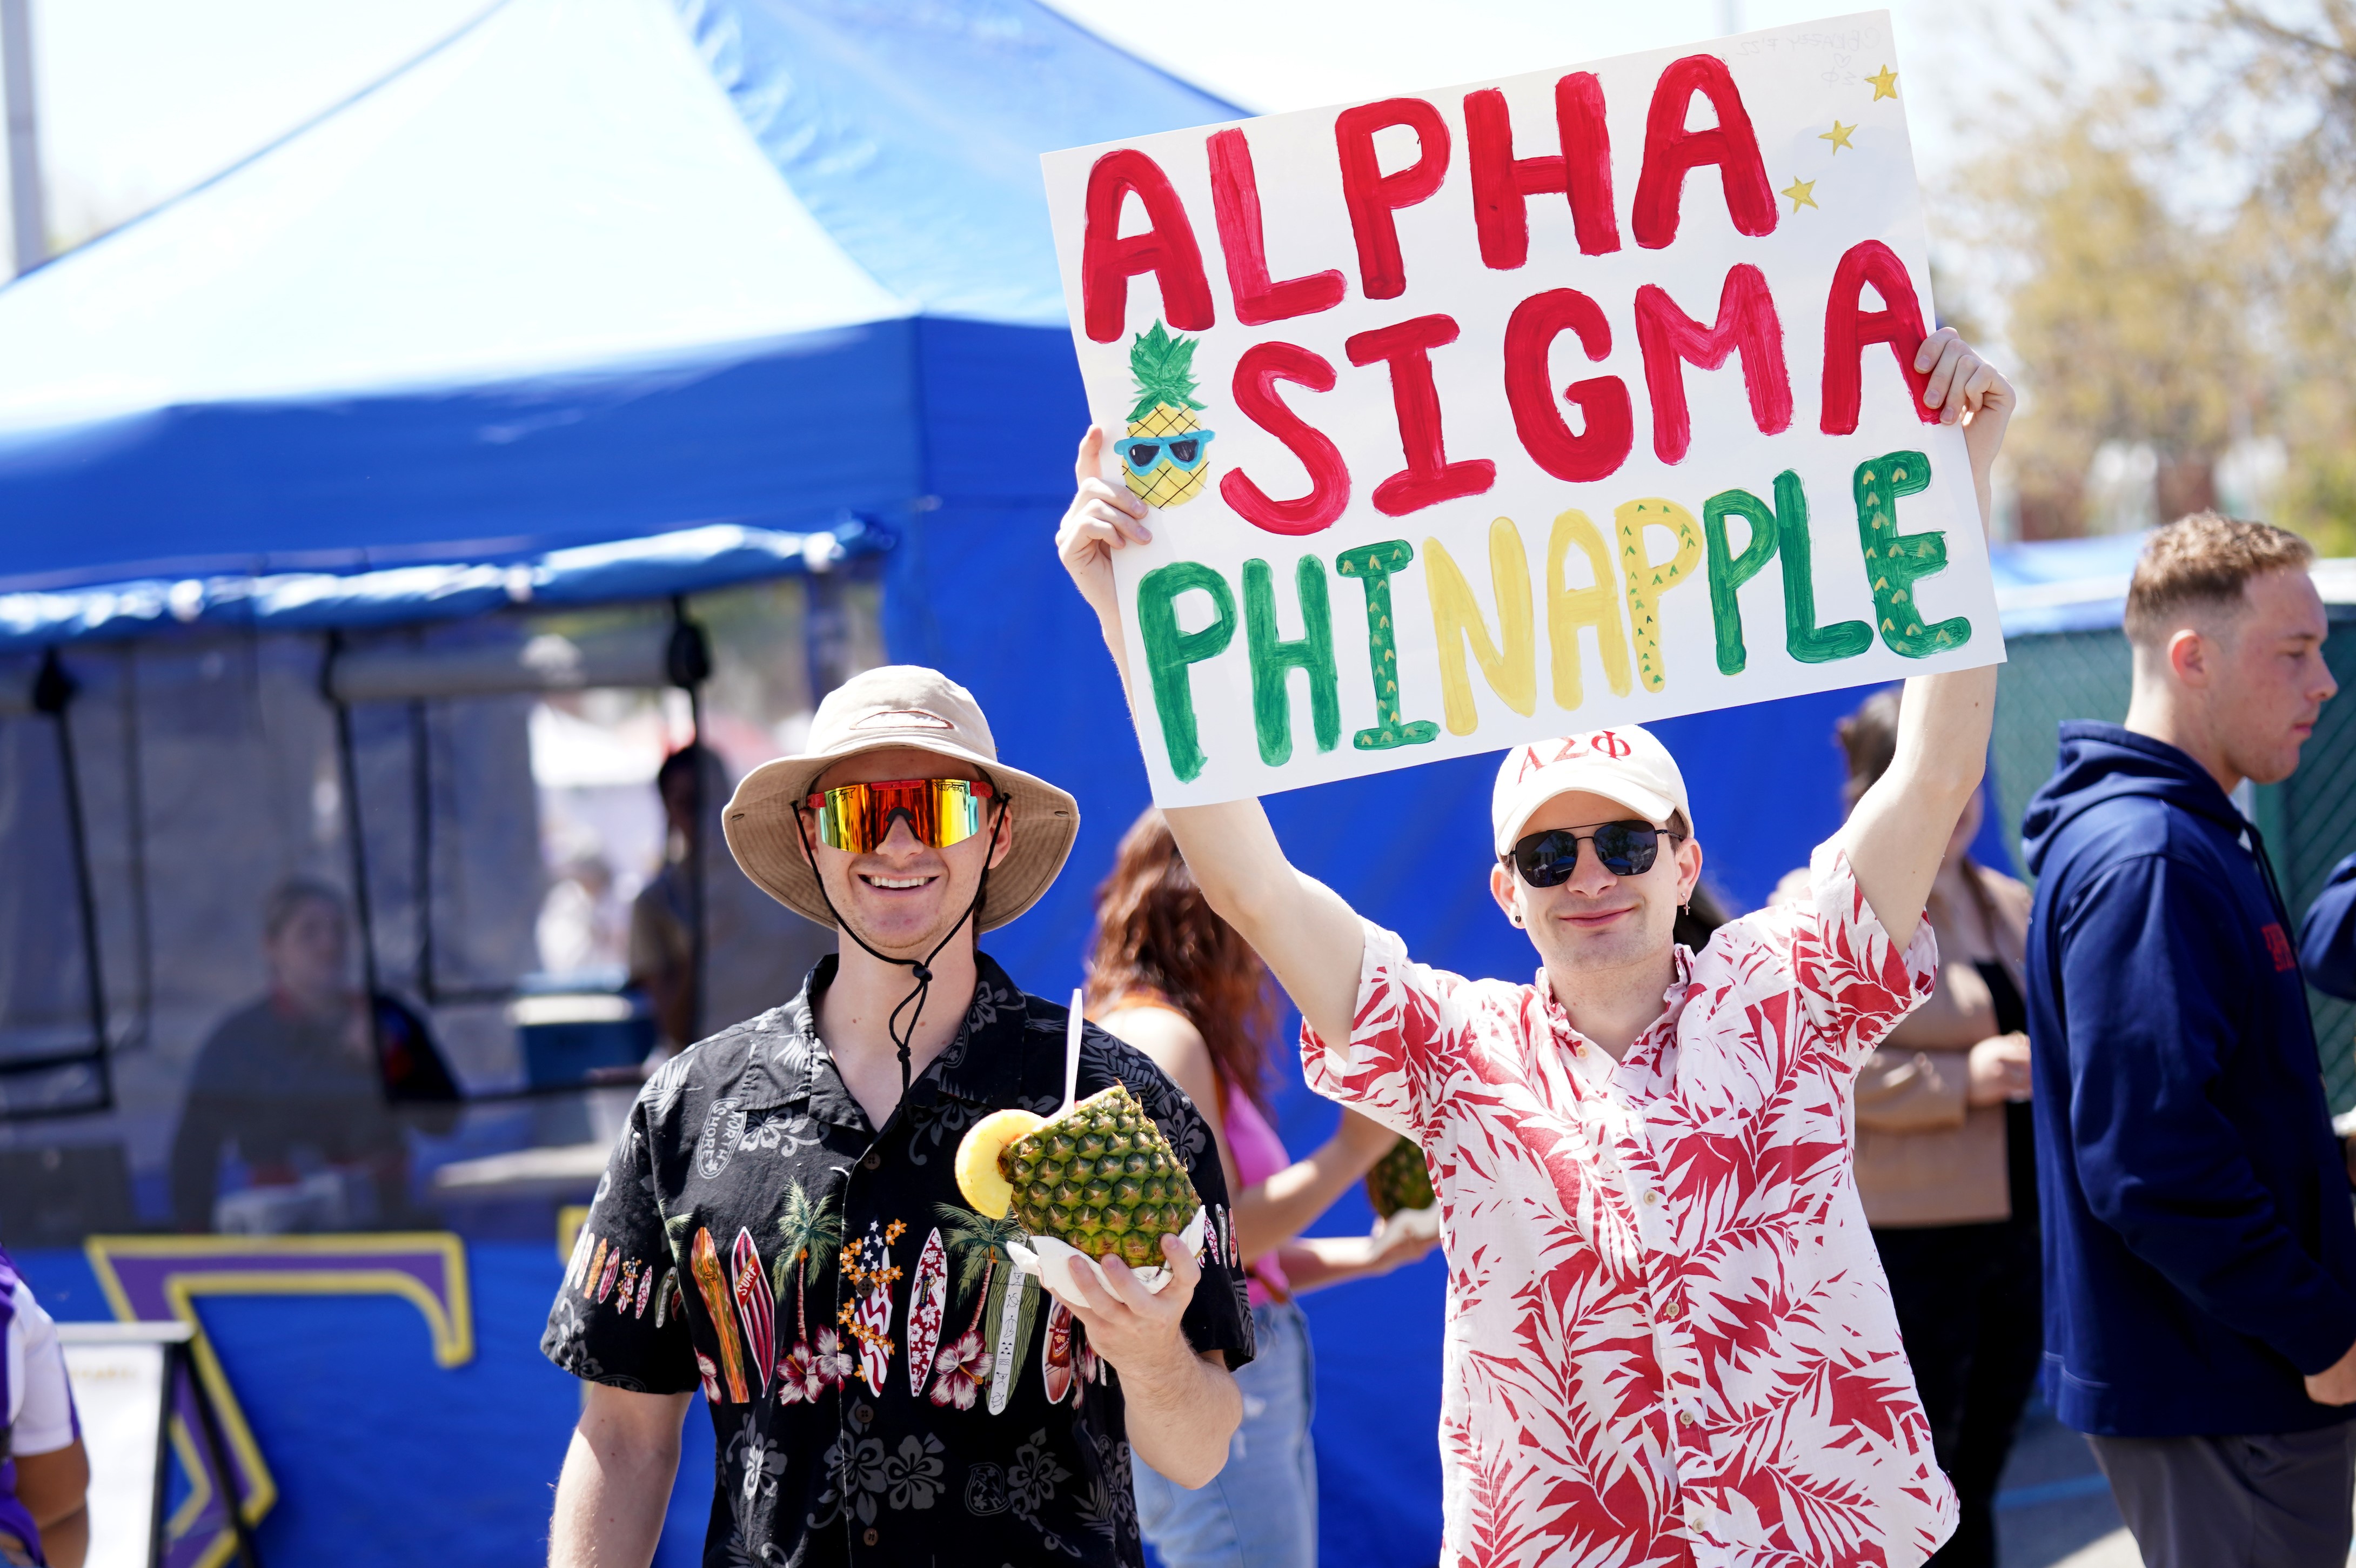 Alpha Sigma Phi members sell their famous pineapple bowls at Vintage Days